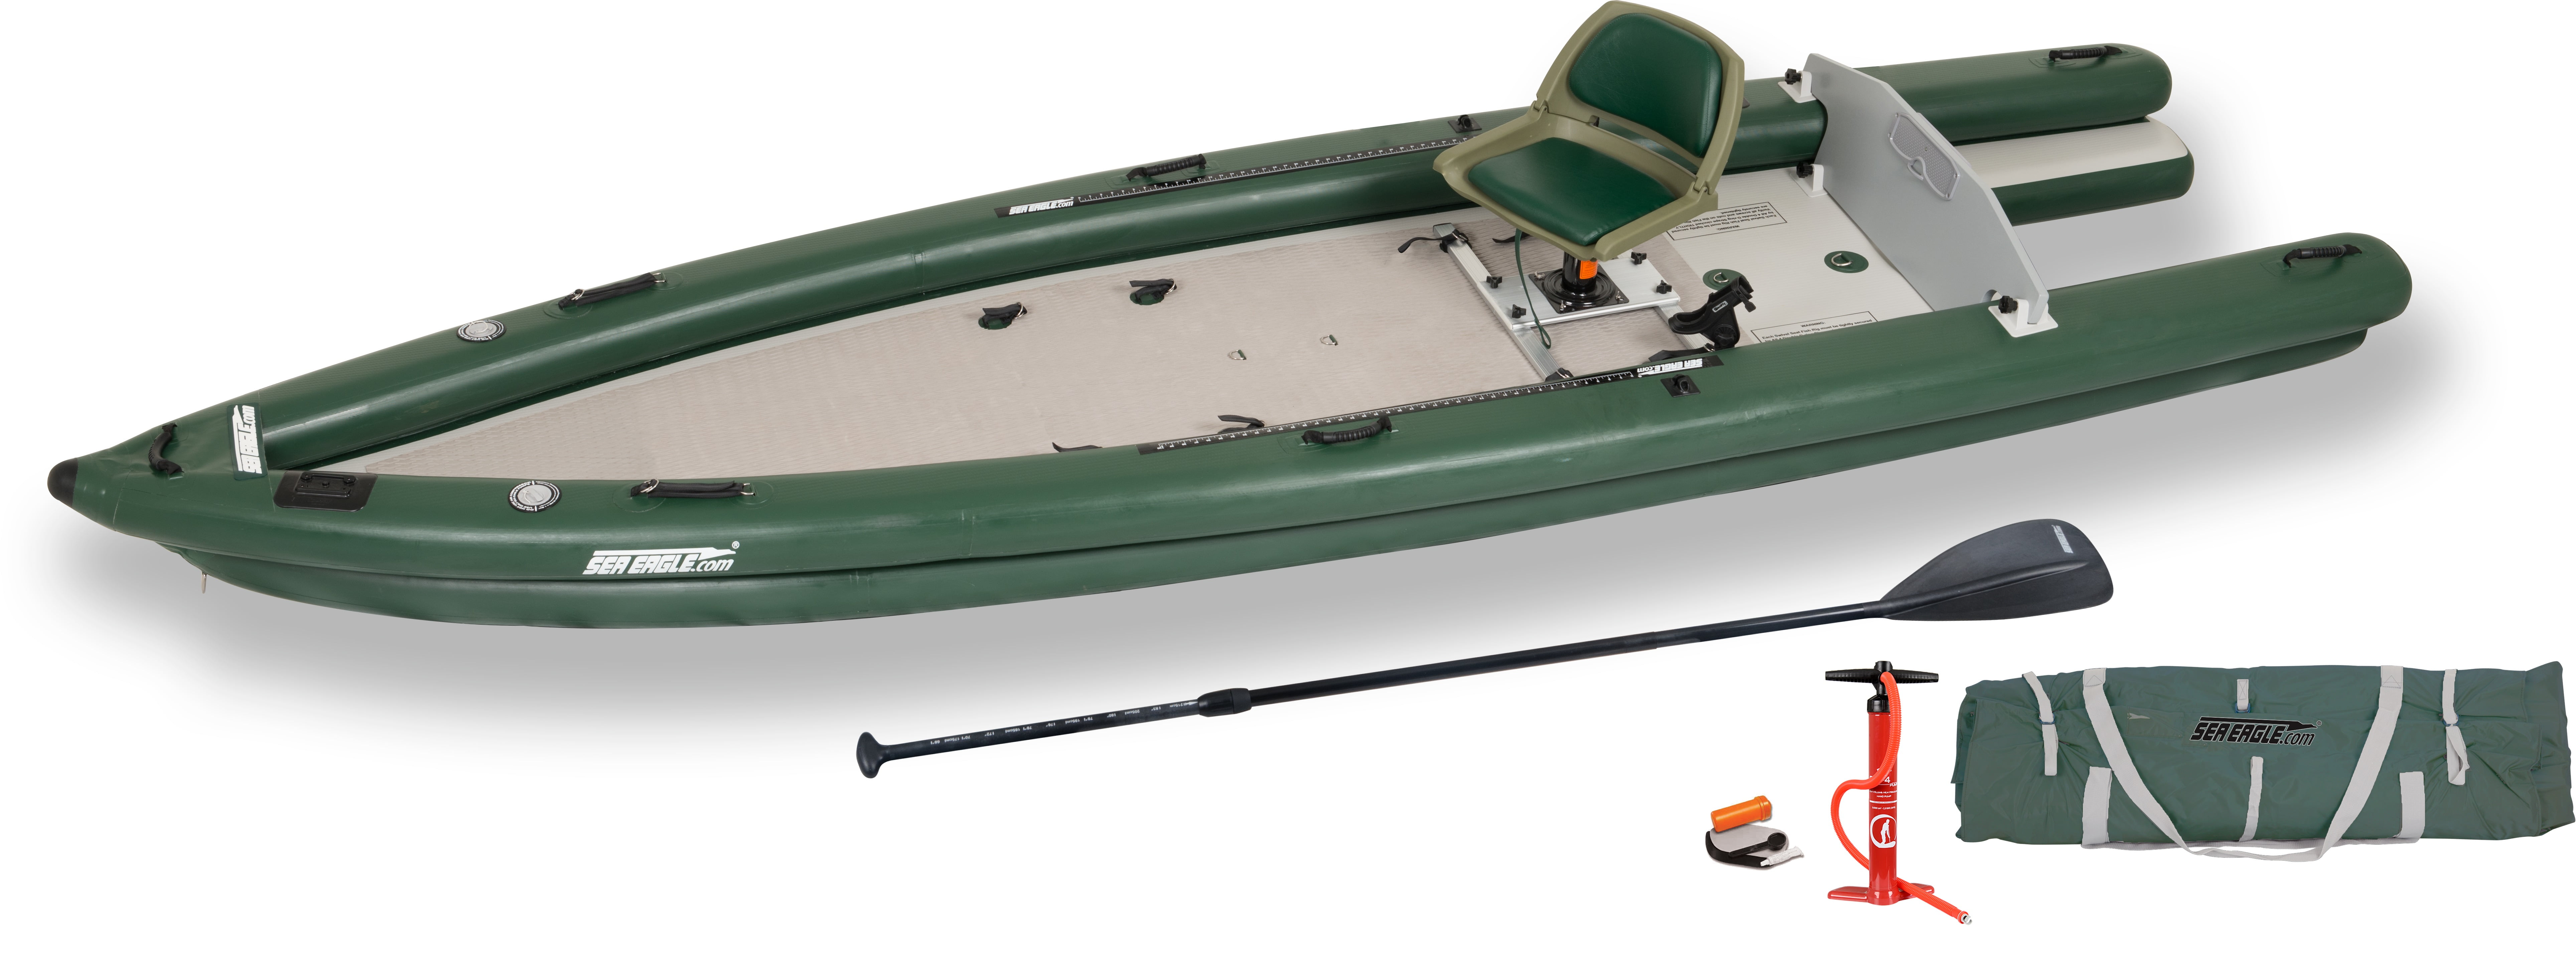 This inflatable kayak is a weapon! #fishingkayak #fishing #kayakfishing  #bassfishing #bcf 